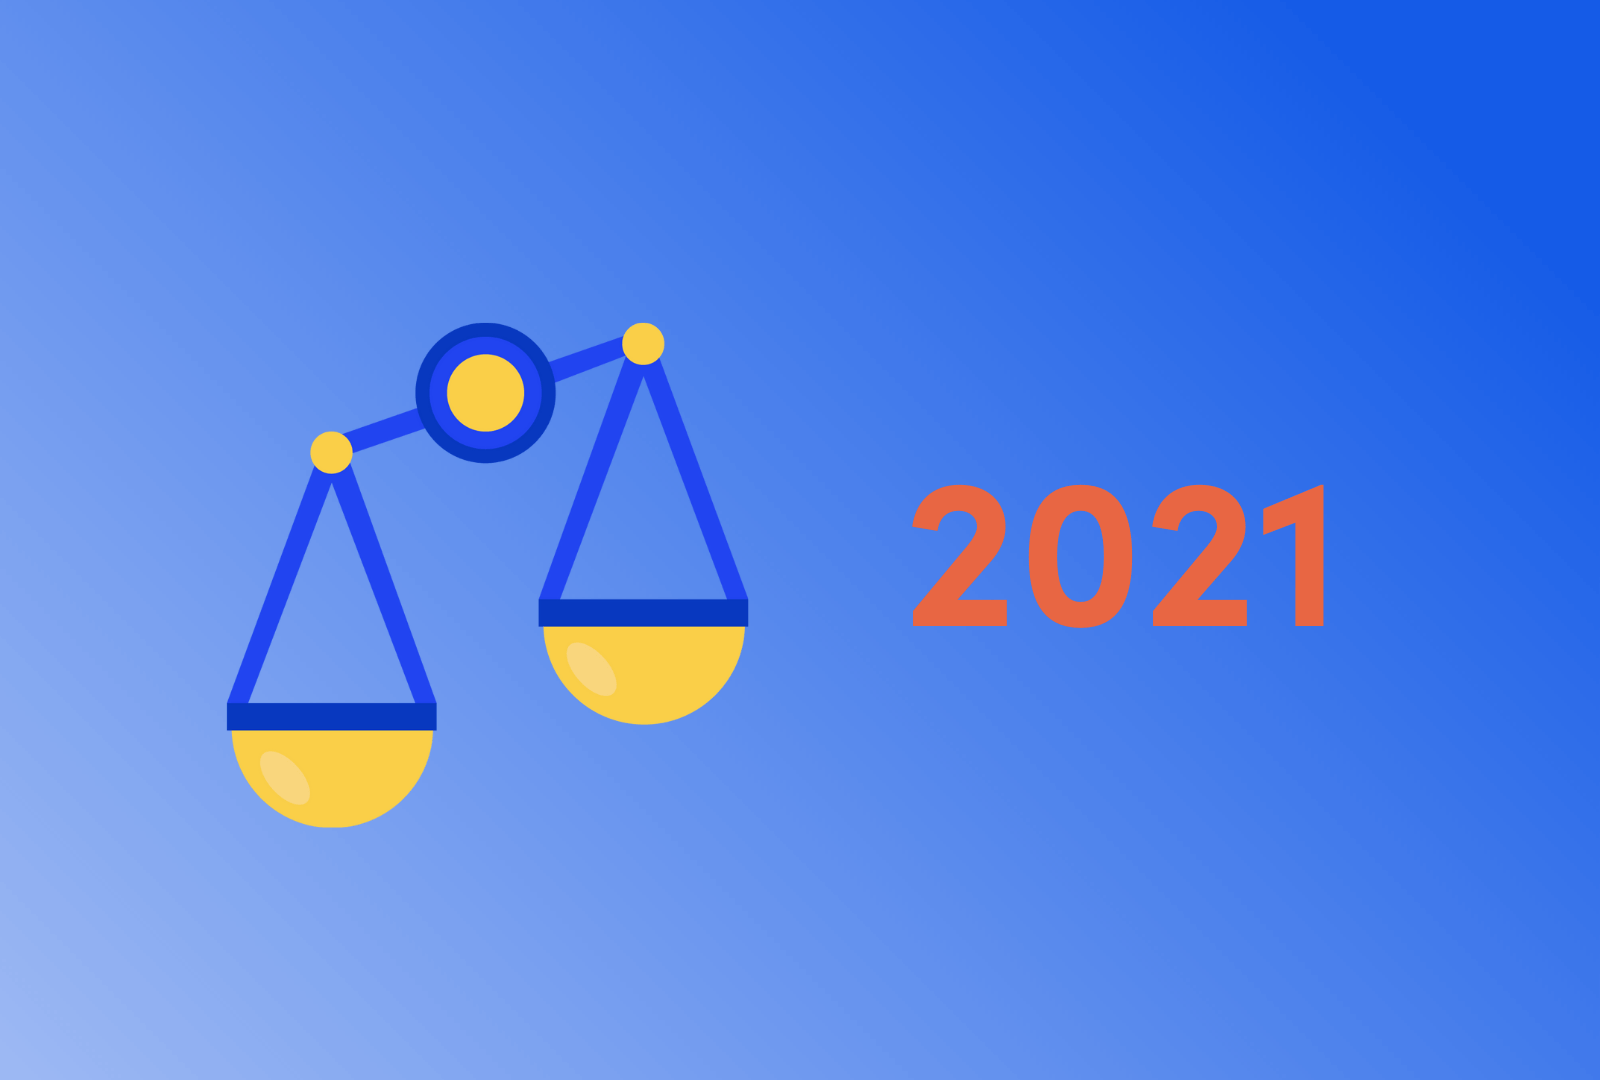 5 of the most significant data protection developments in 2021